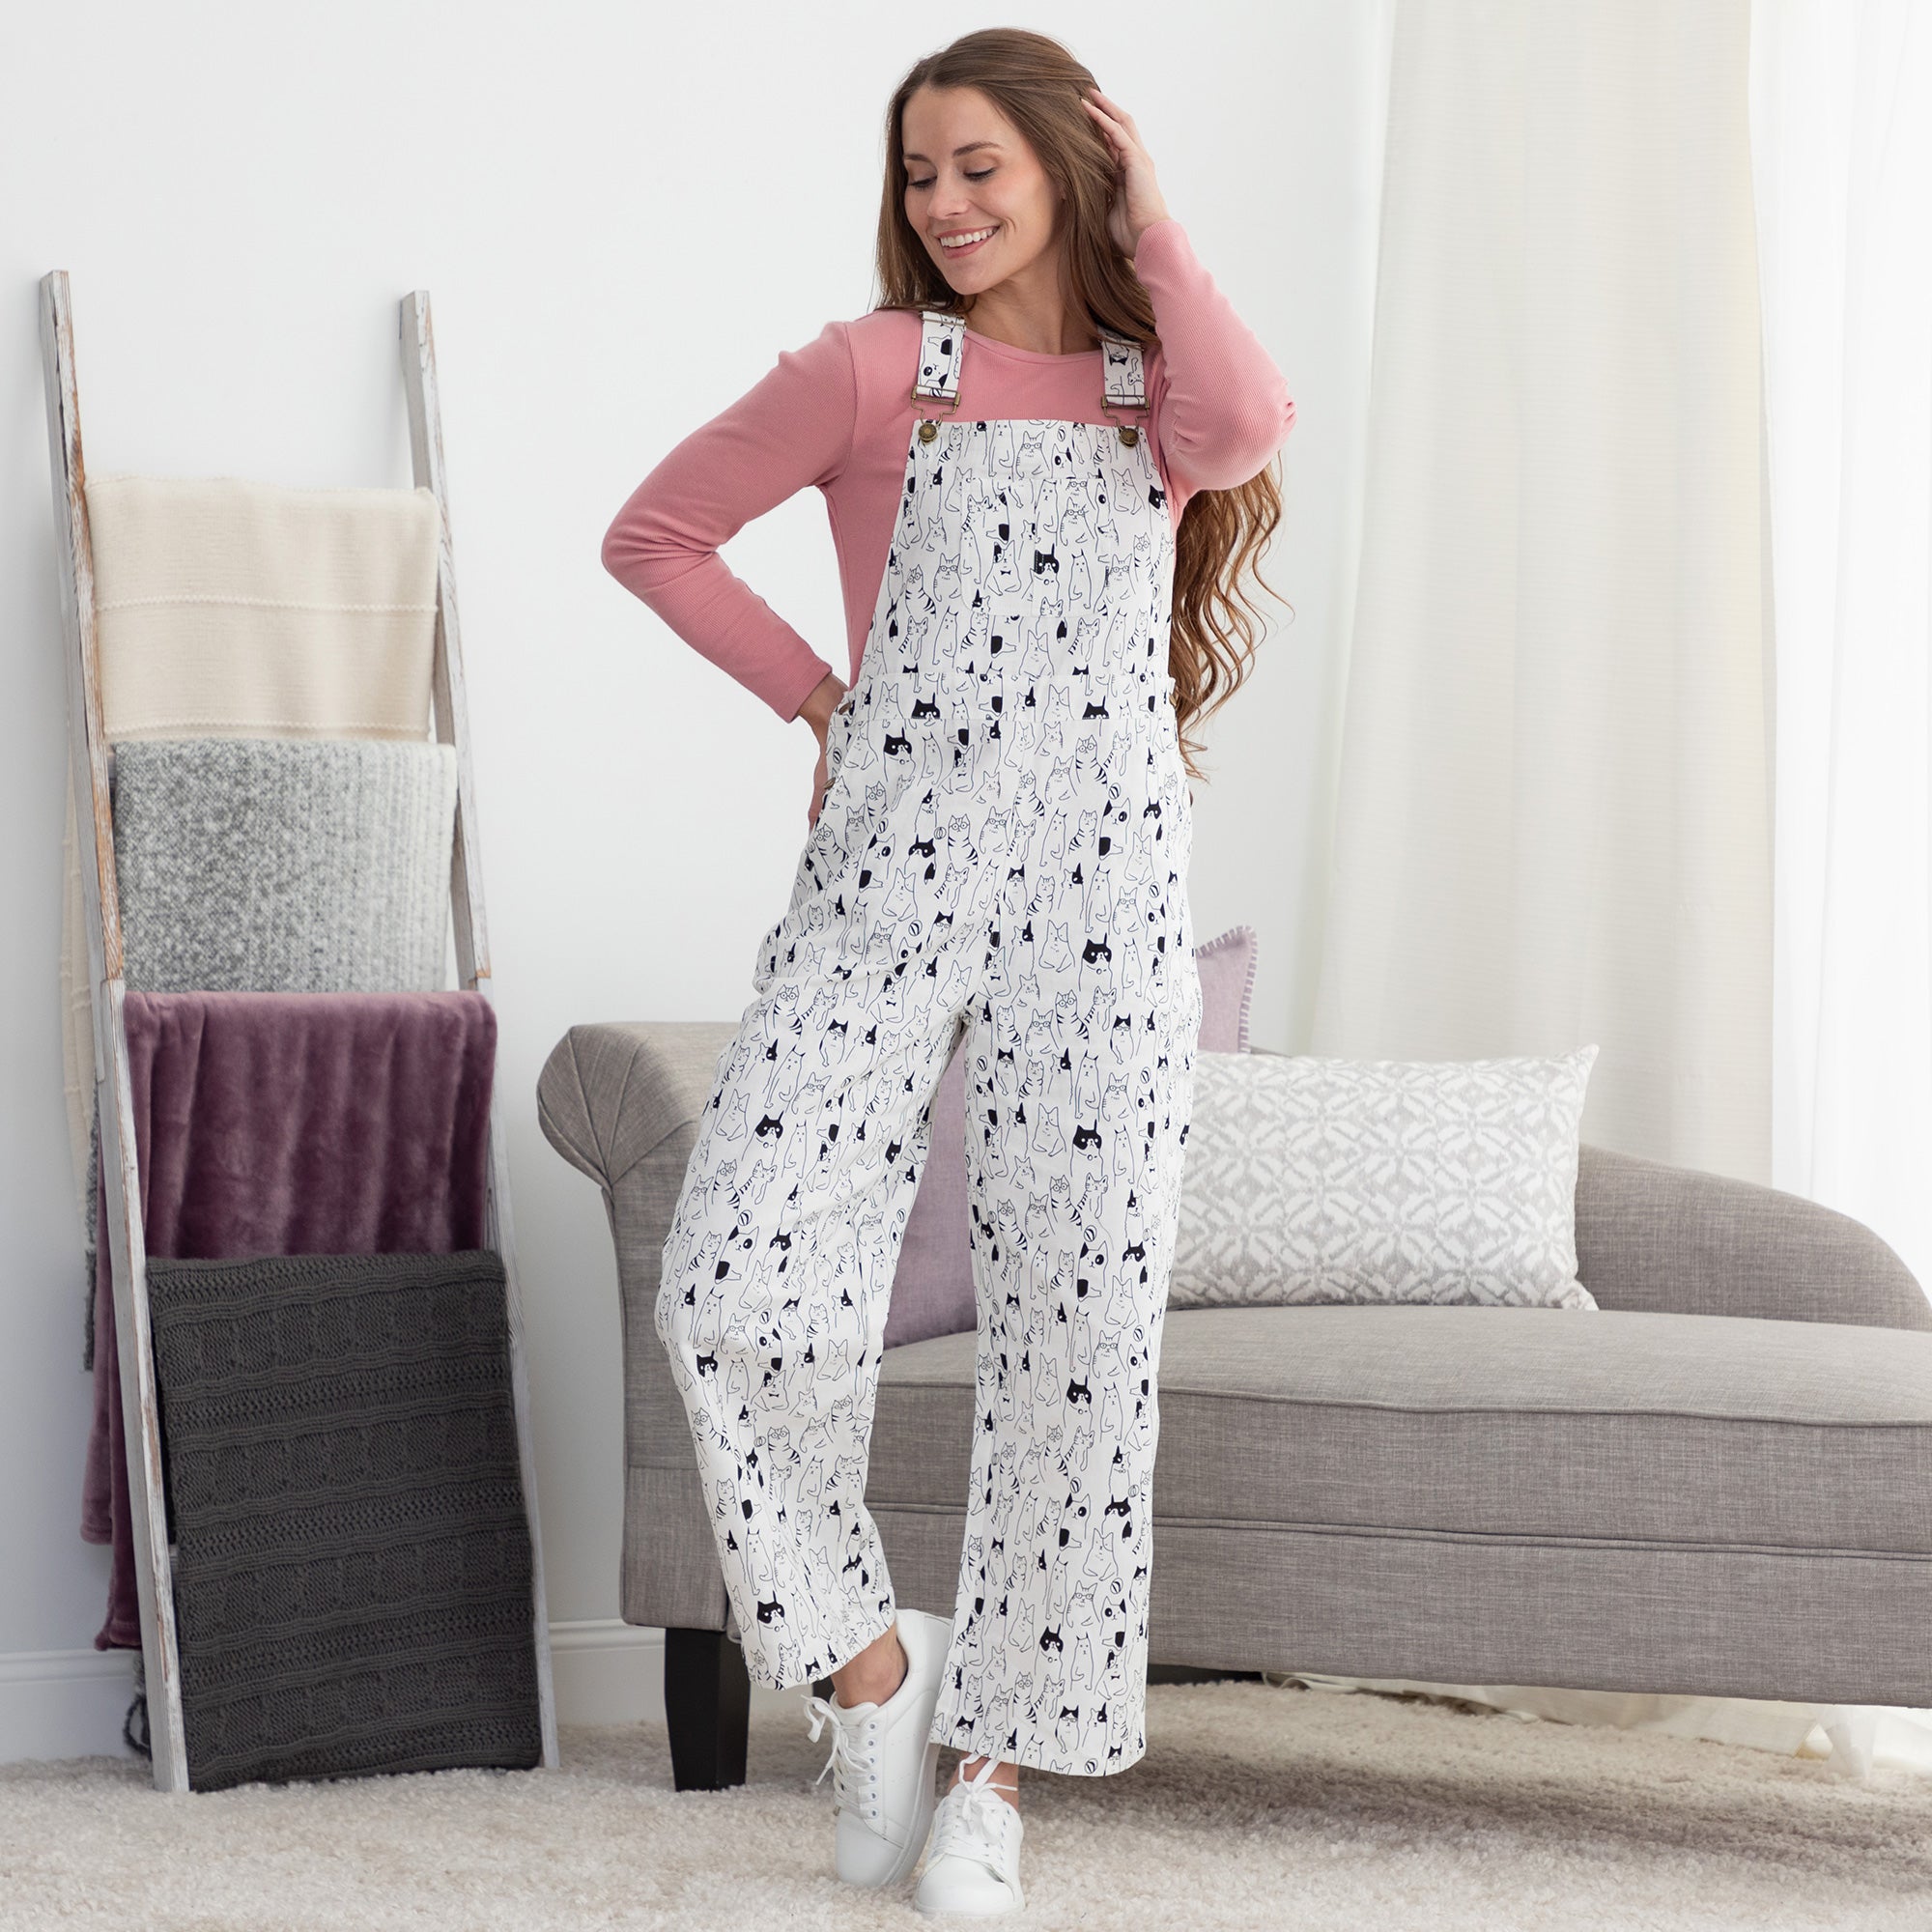 All Over Cat Overalls - White - M